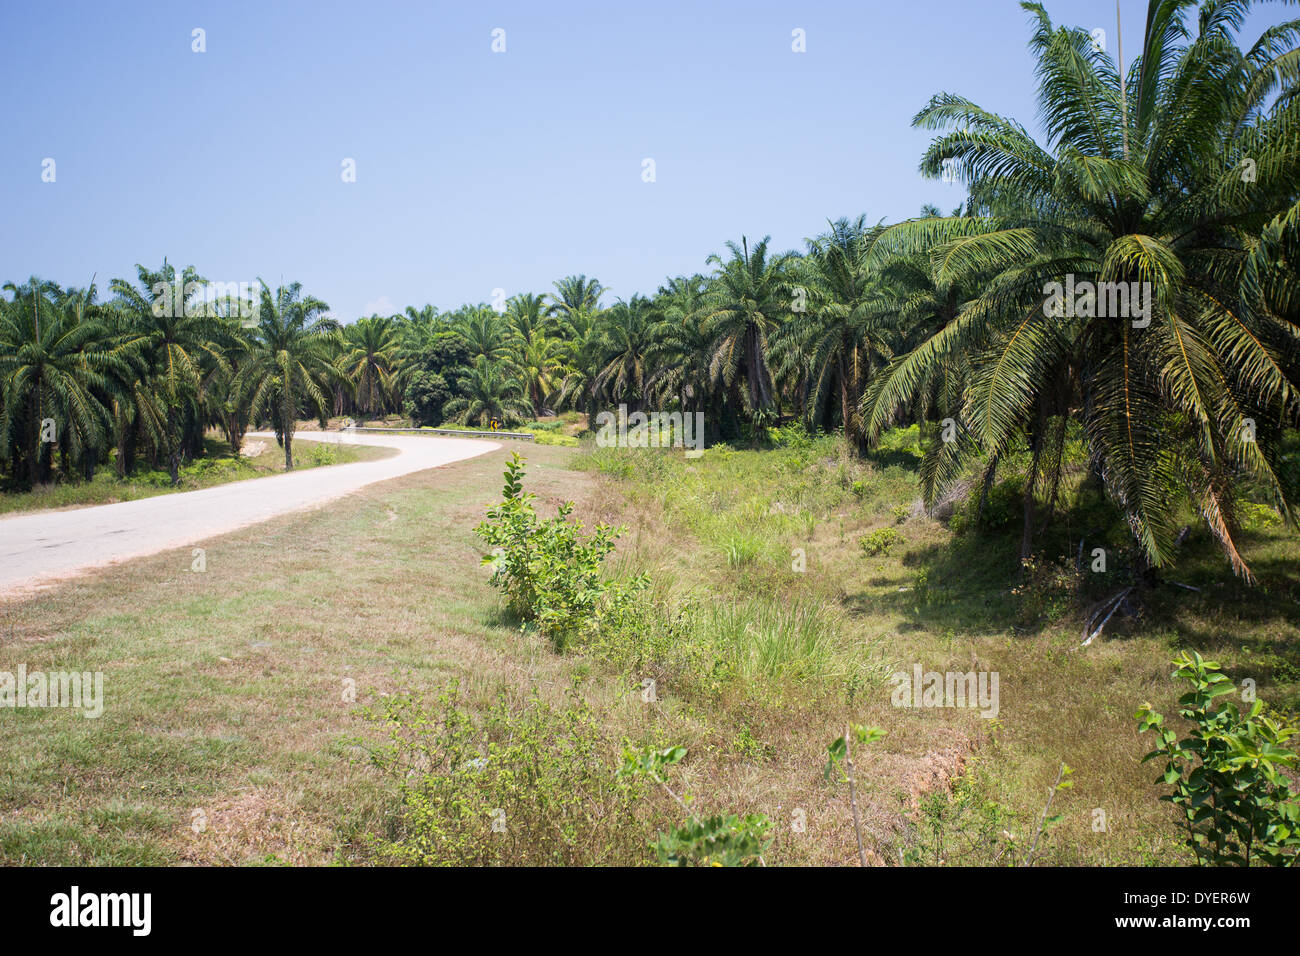 Palm Oil plantation in Pahang province, Malaysia Stock Photo